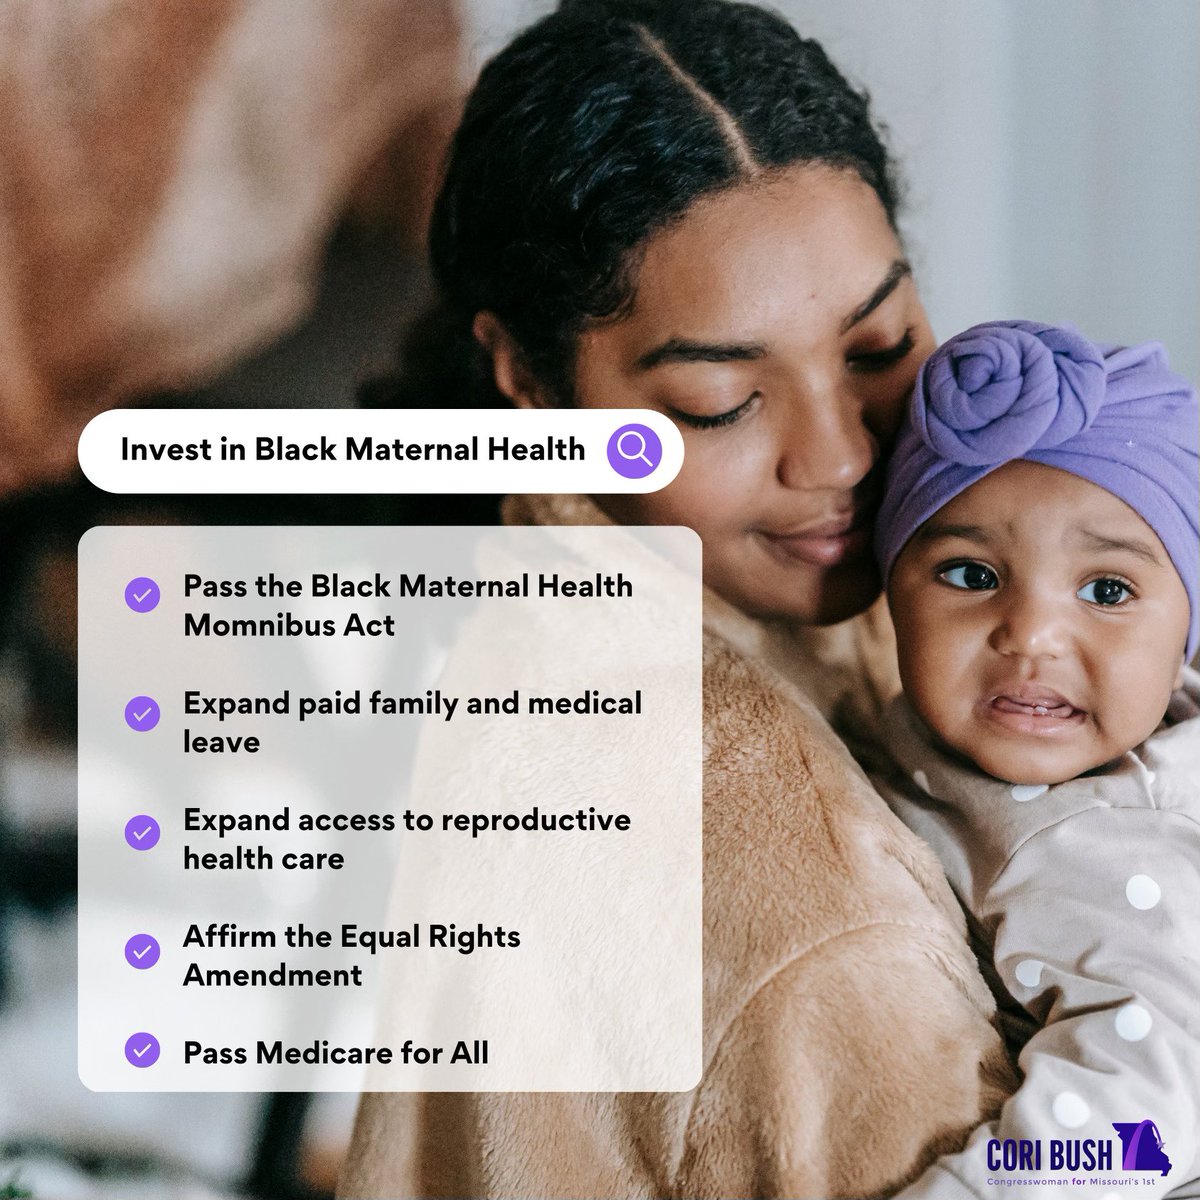 Black people are dying at 3x the rate of white people from preventable pregnancy complications.

We must champion policies that invest in the health and well-being of Black parents and children. #BMHW23